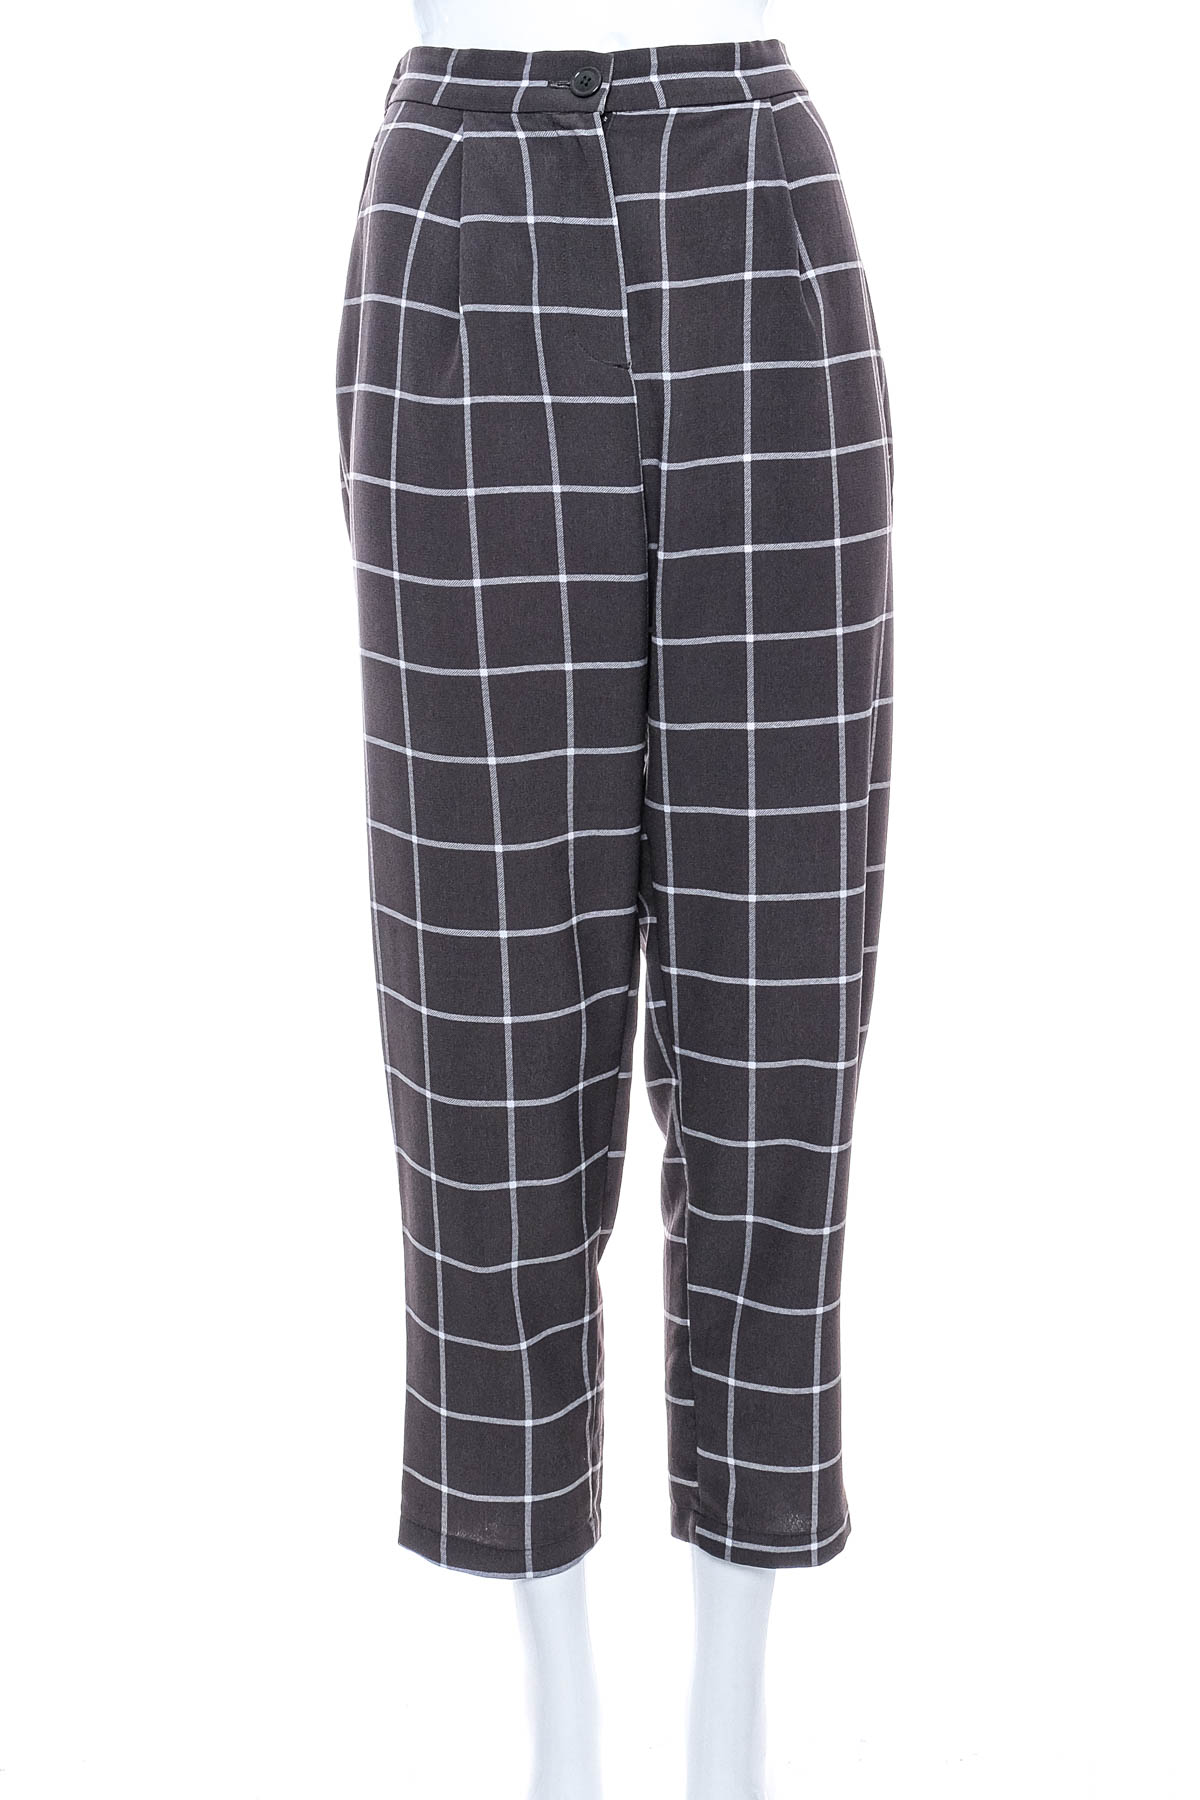 Women's trousers - DIVIDED - 0